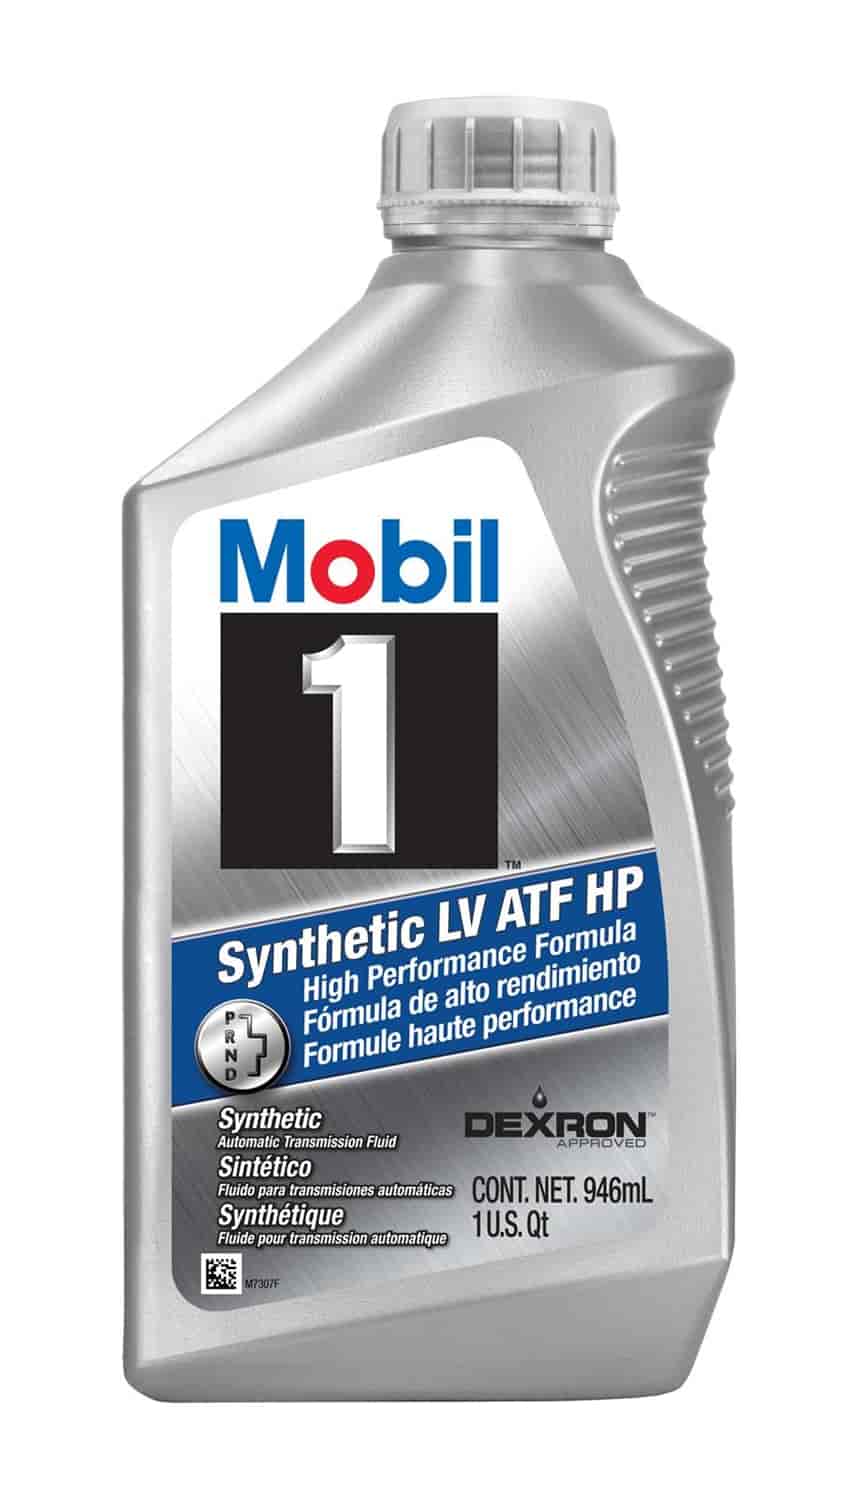 File:Mobil 1 Synthetic LV ATF HP Blue Label Back.jpg - Wikimedia Commons